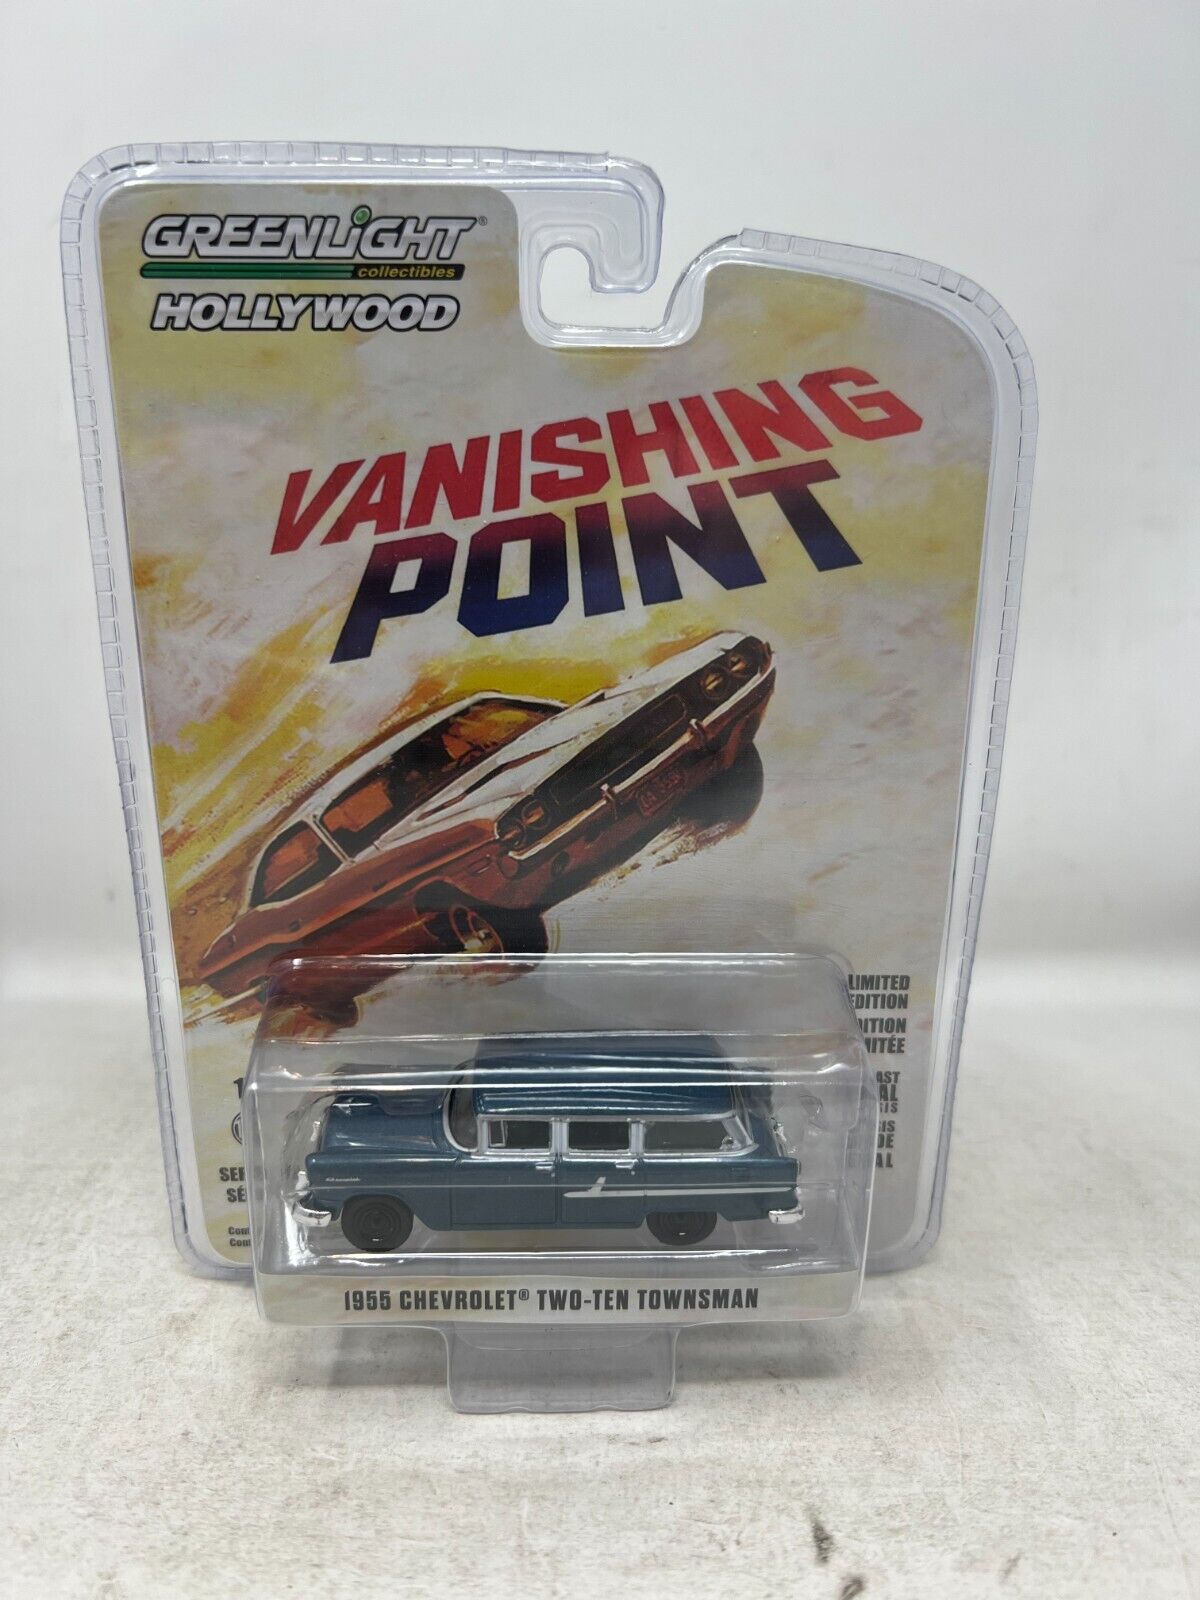 Greenlight Hollywood Vanishing Point 1955 Chevy Two-Ten Townsman 1:64 Diecast